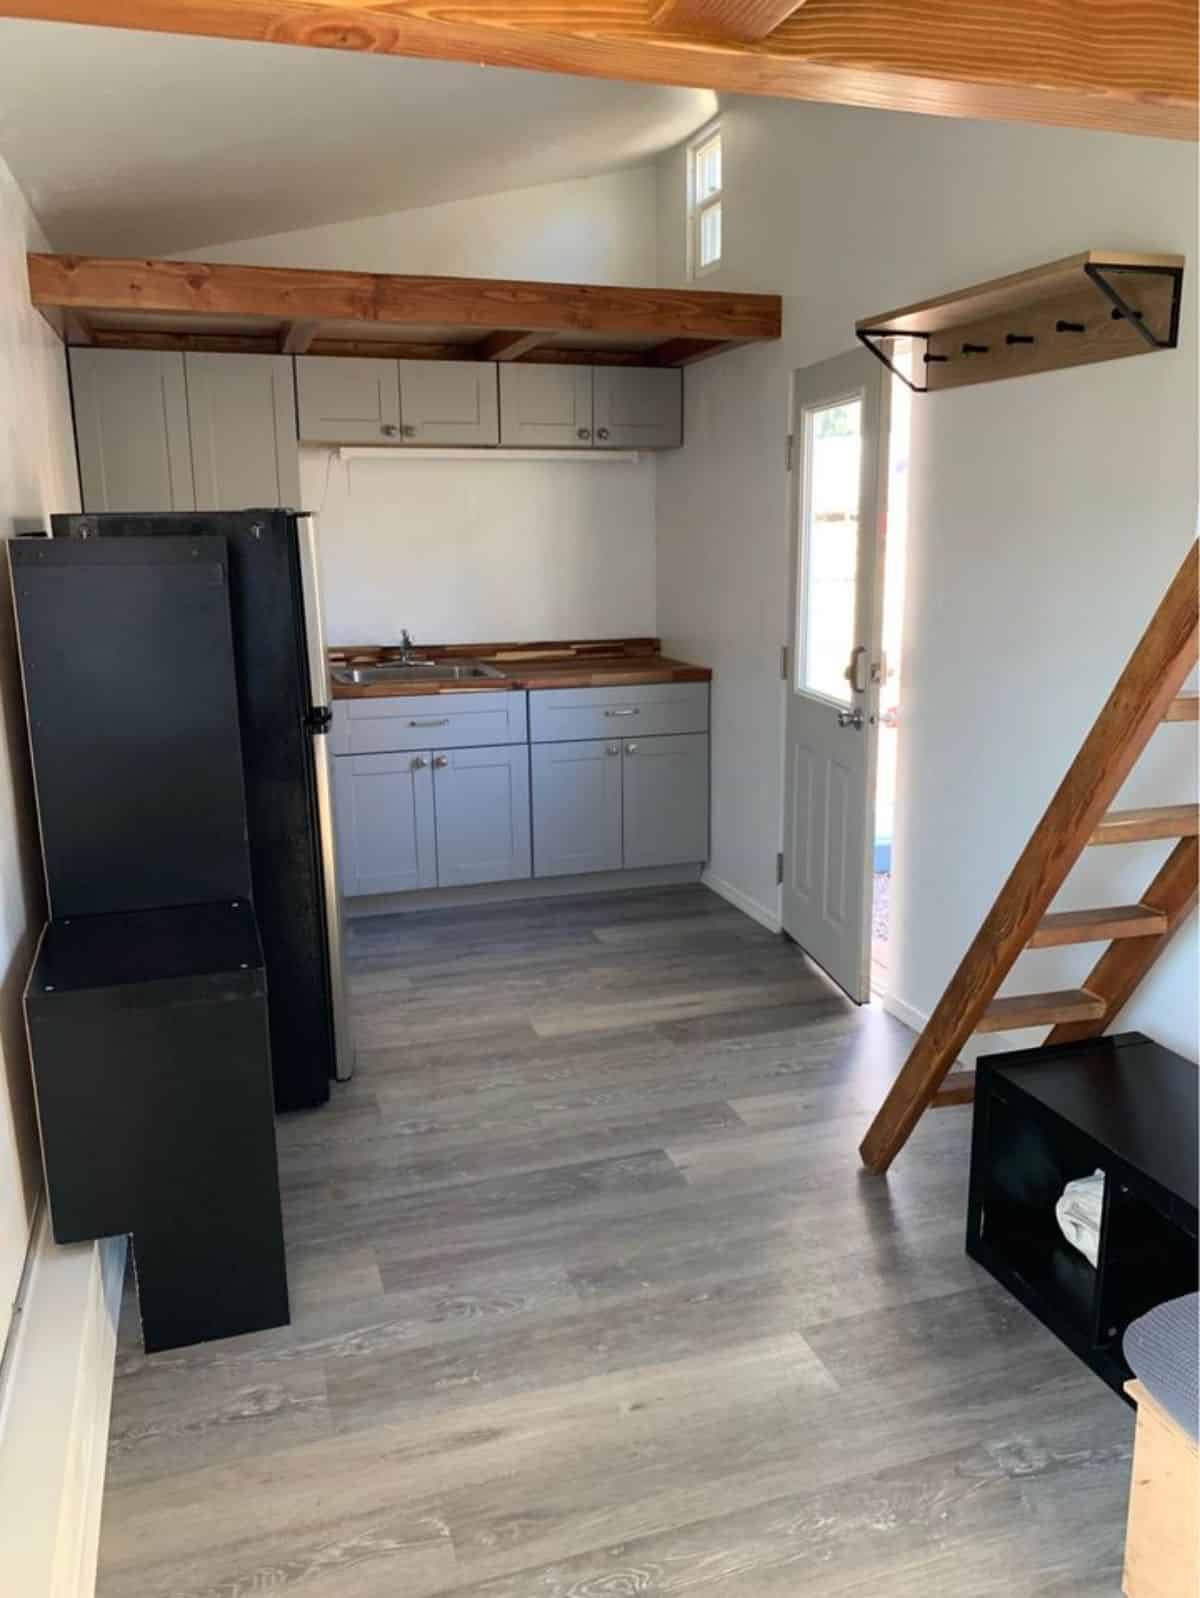 L shaped kitchen area of trailer built tiny house